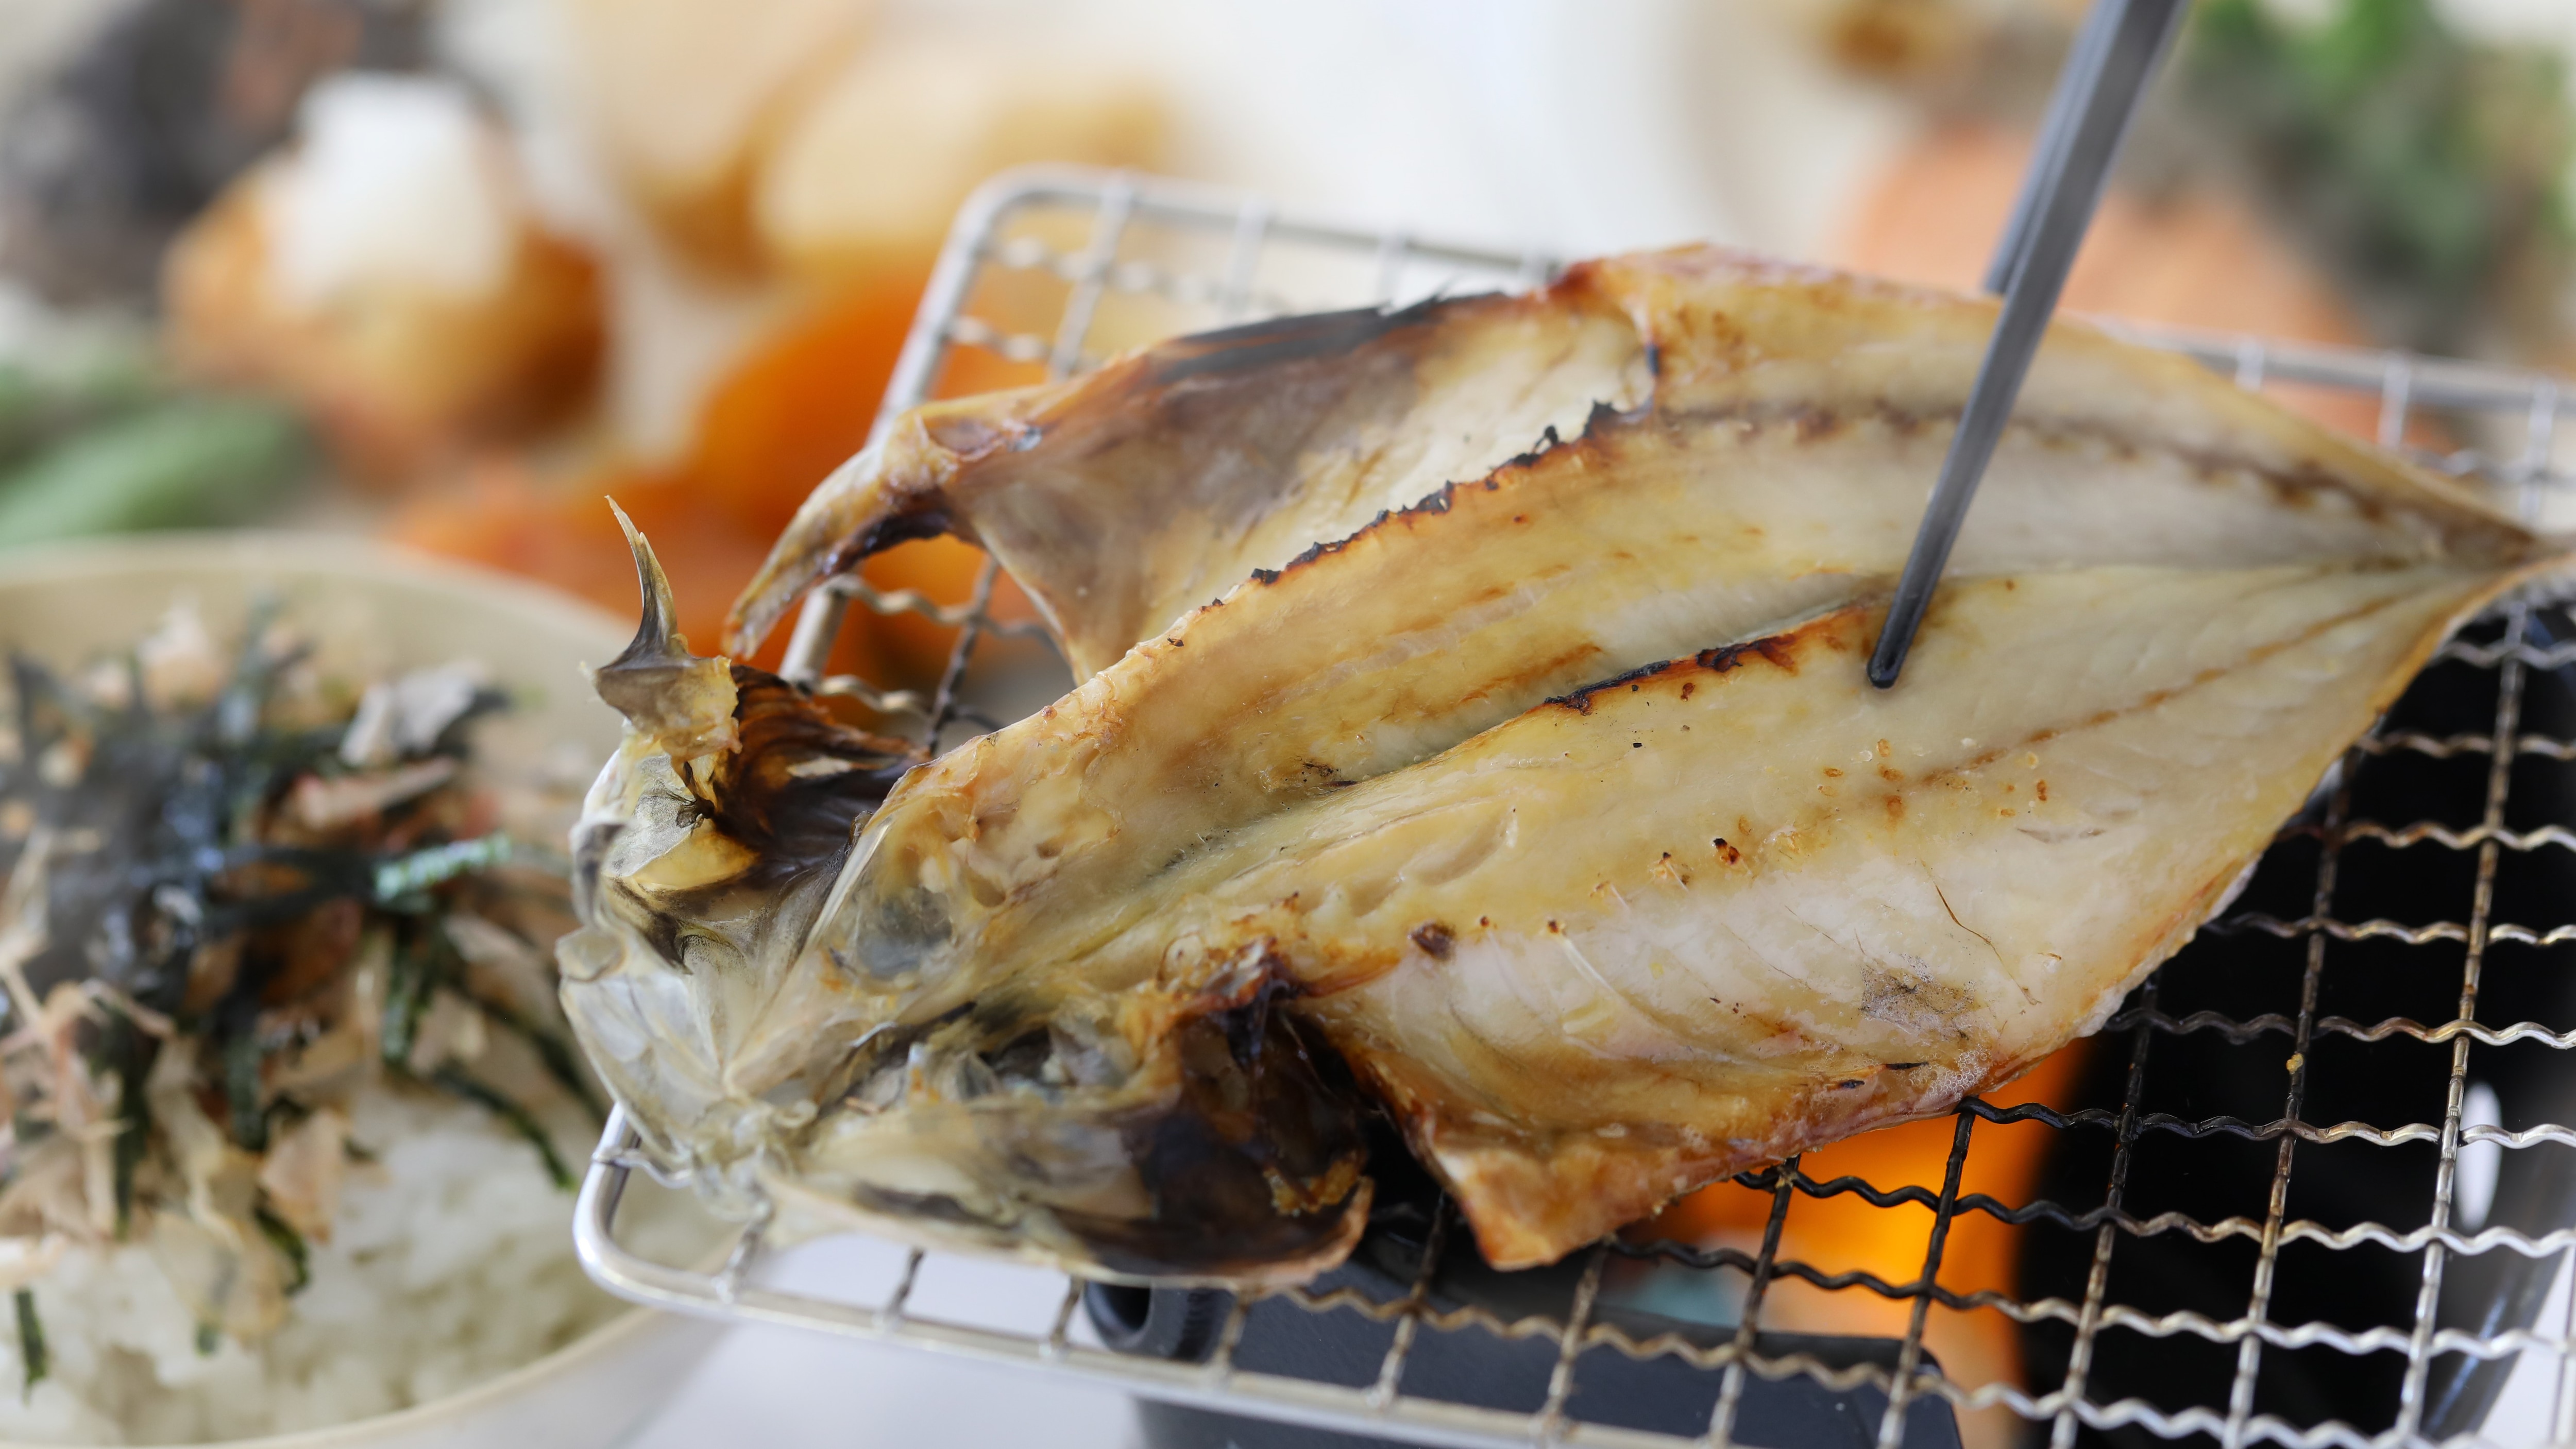 Grilled dried fish